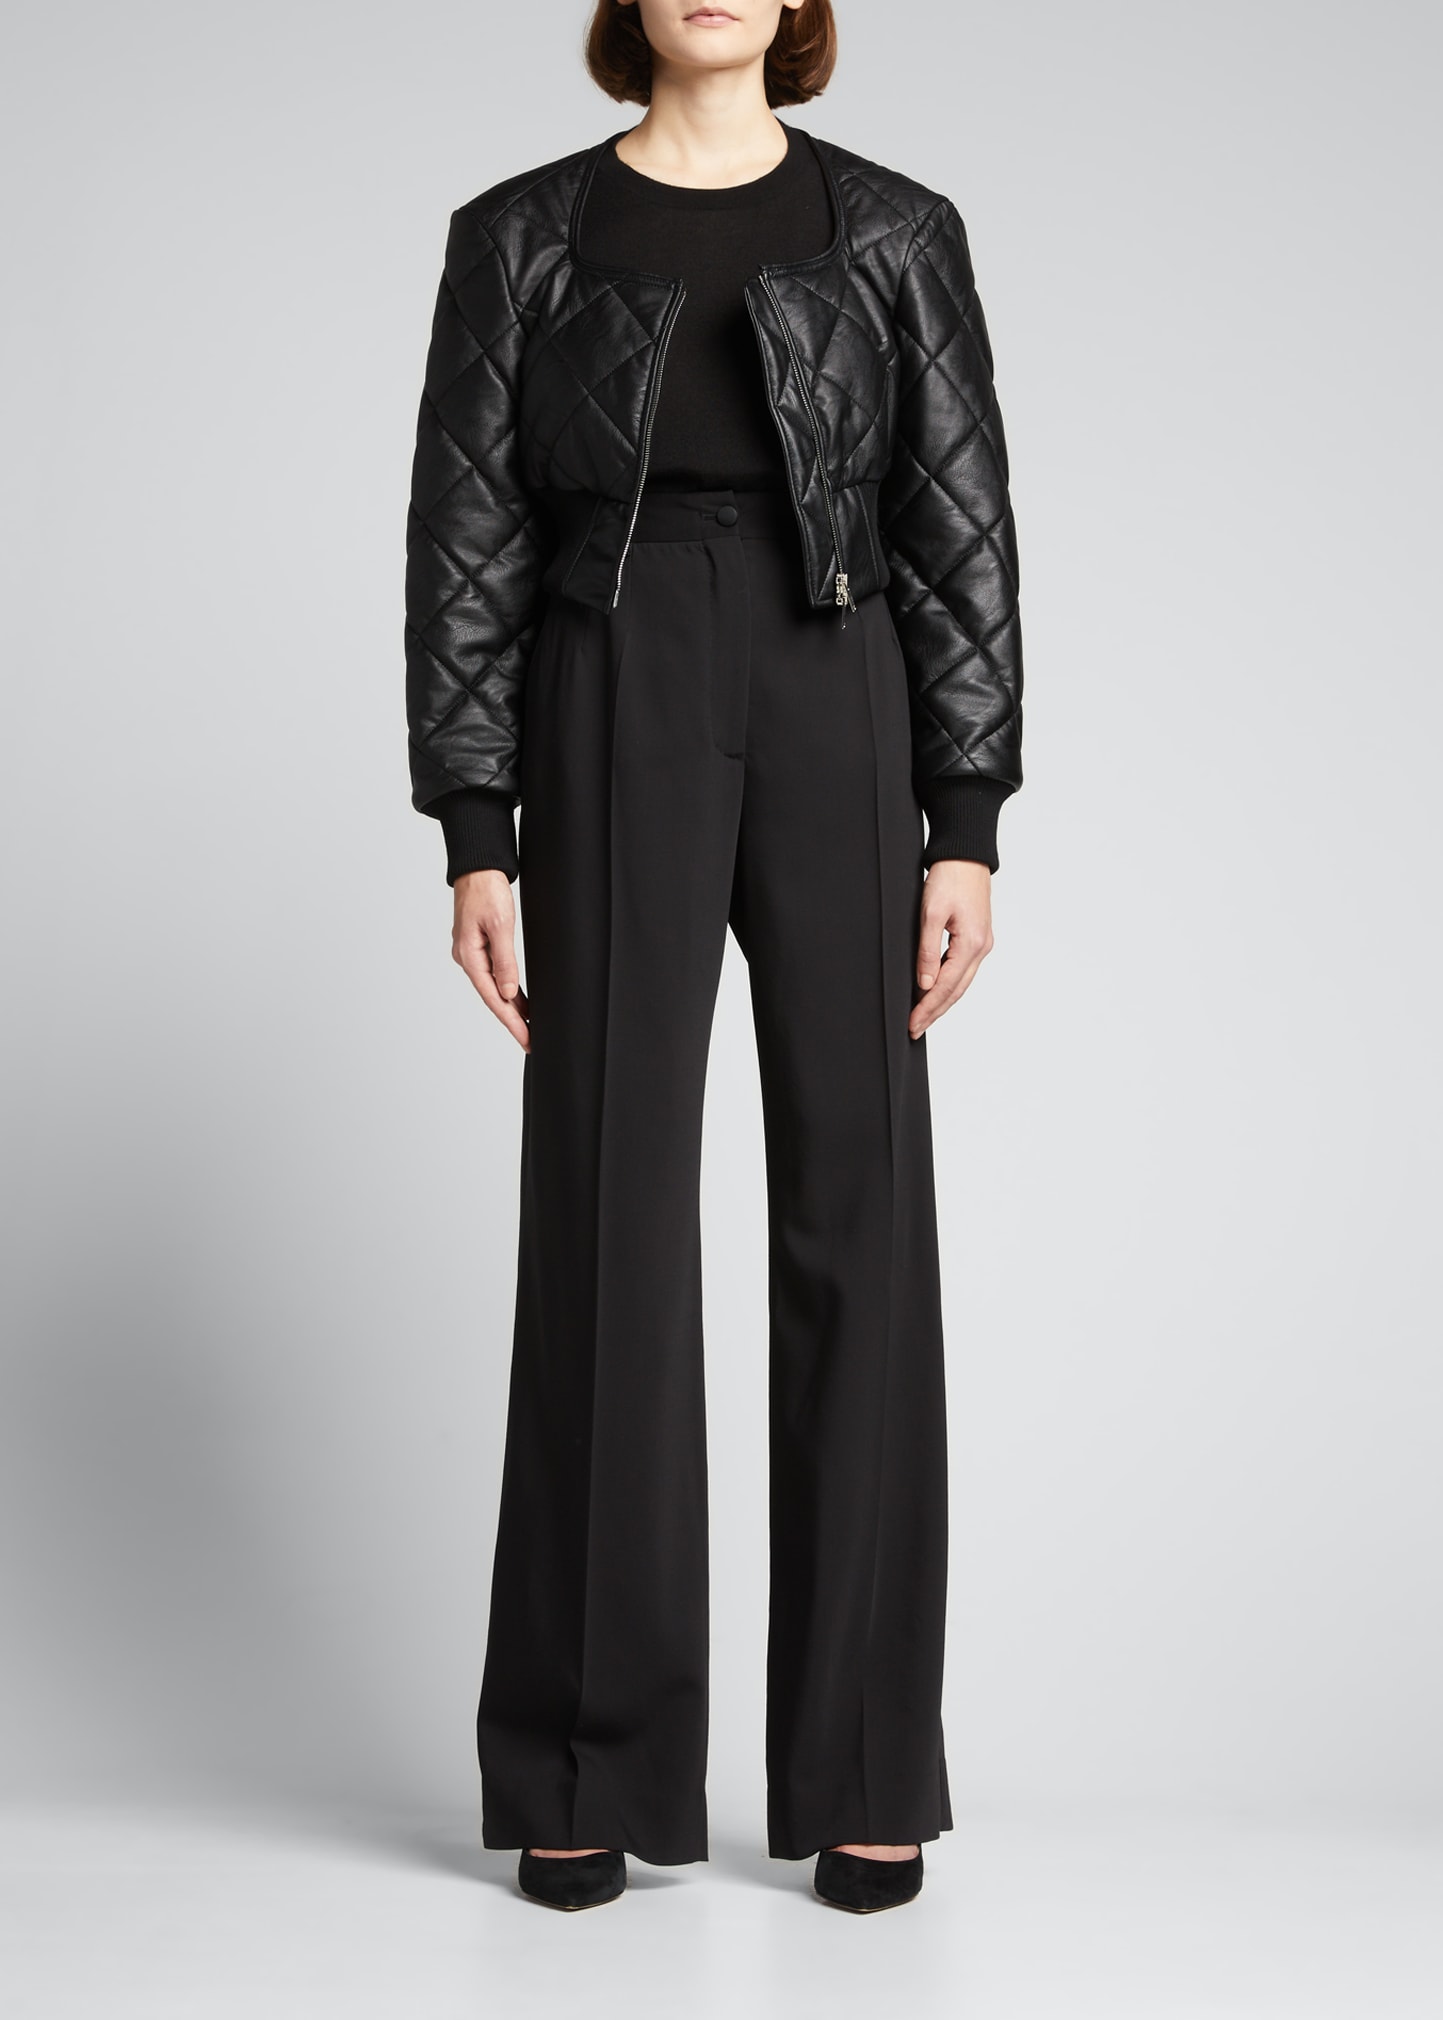 Stella McCartney Faux Leather Quilted Cropped Jacket